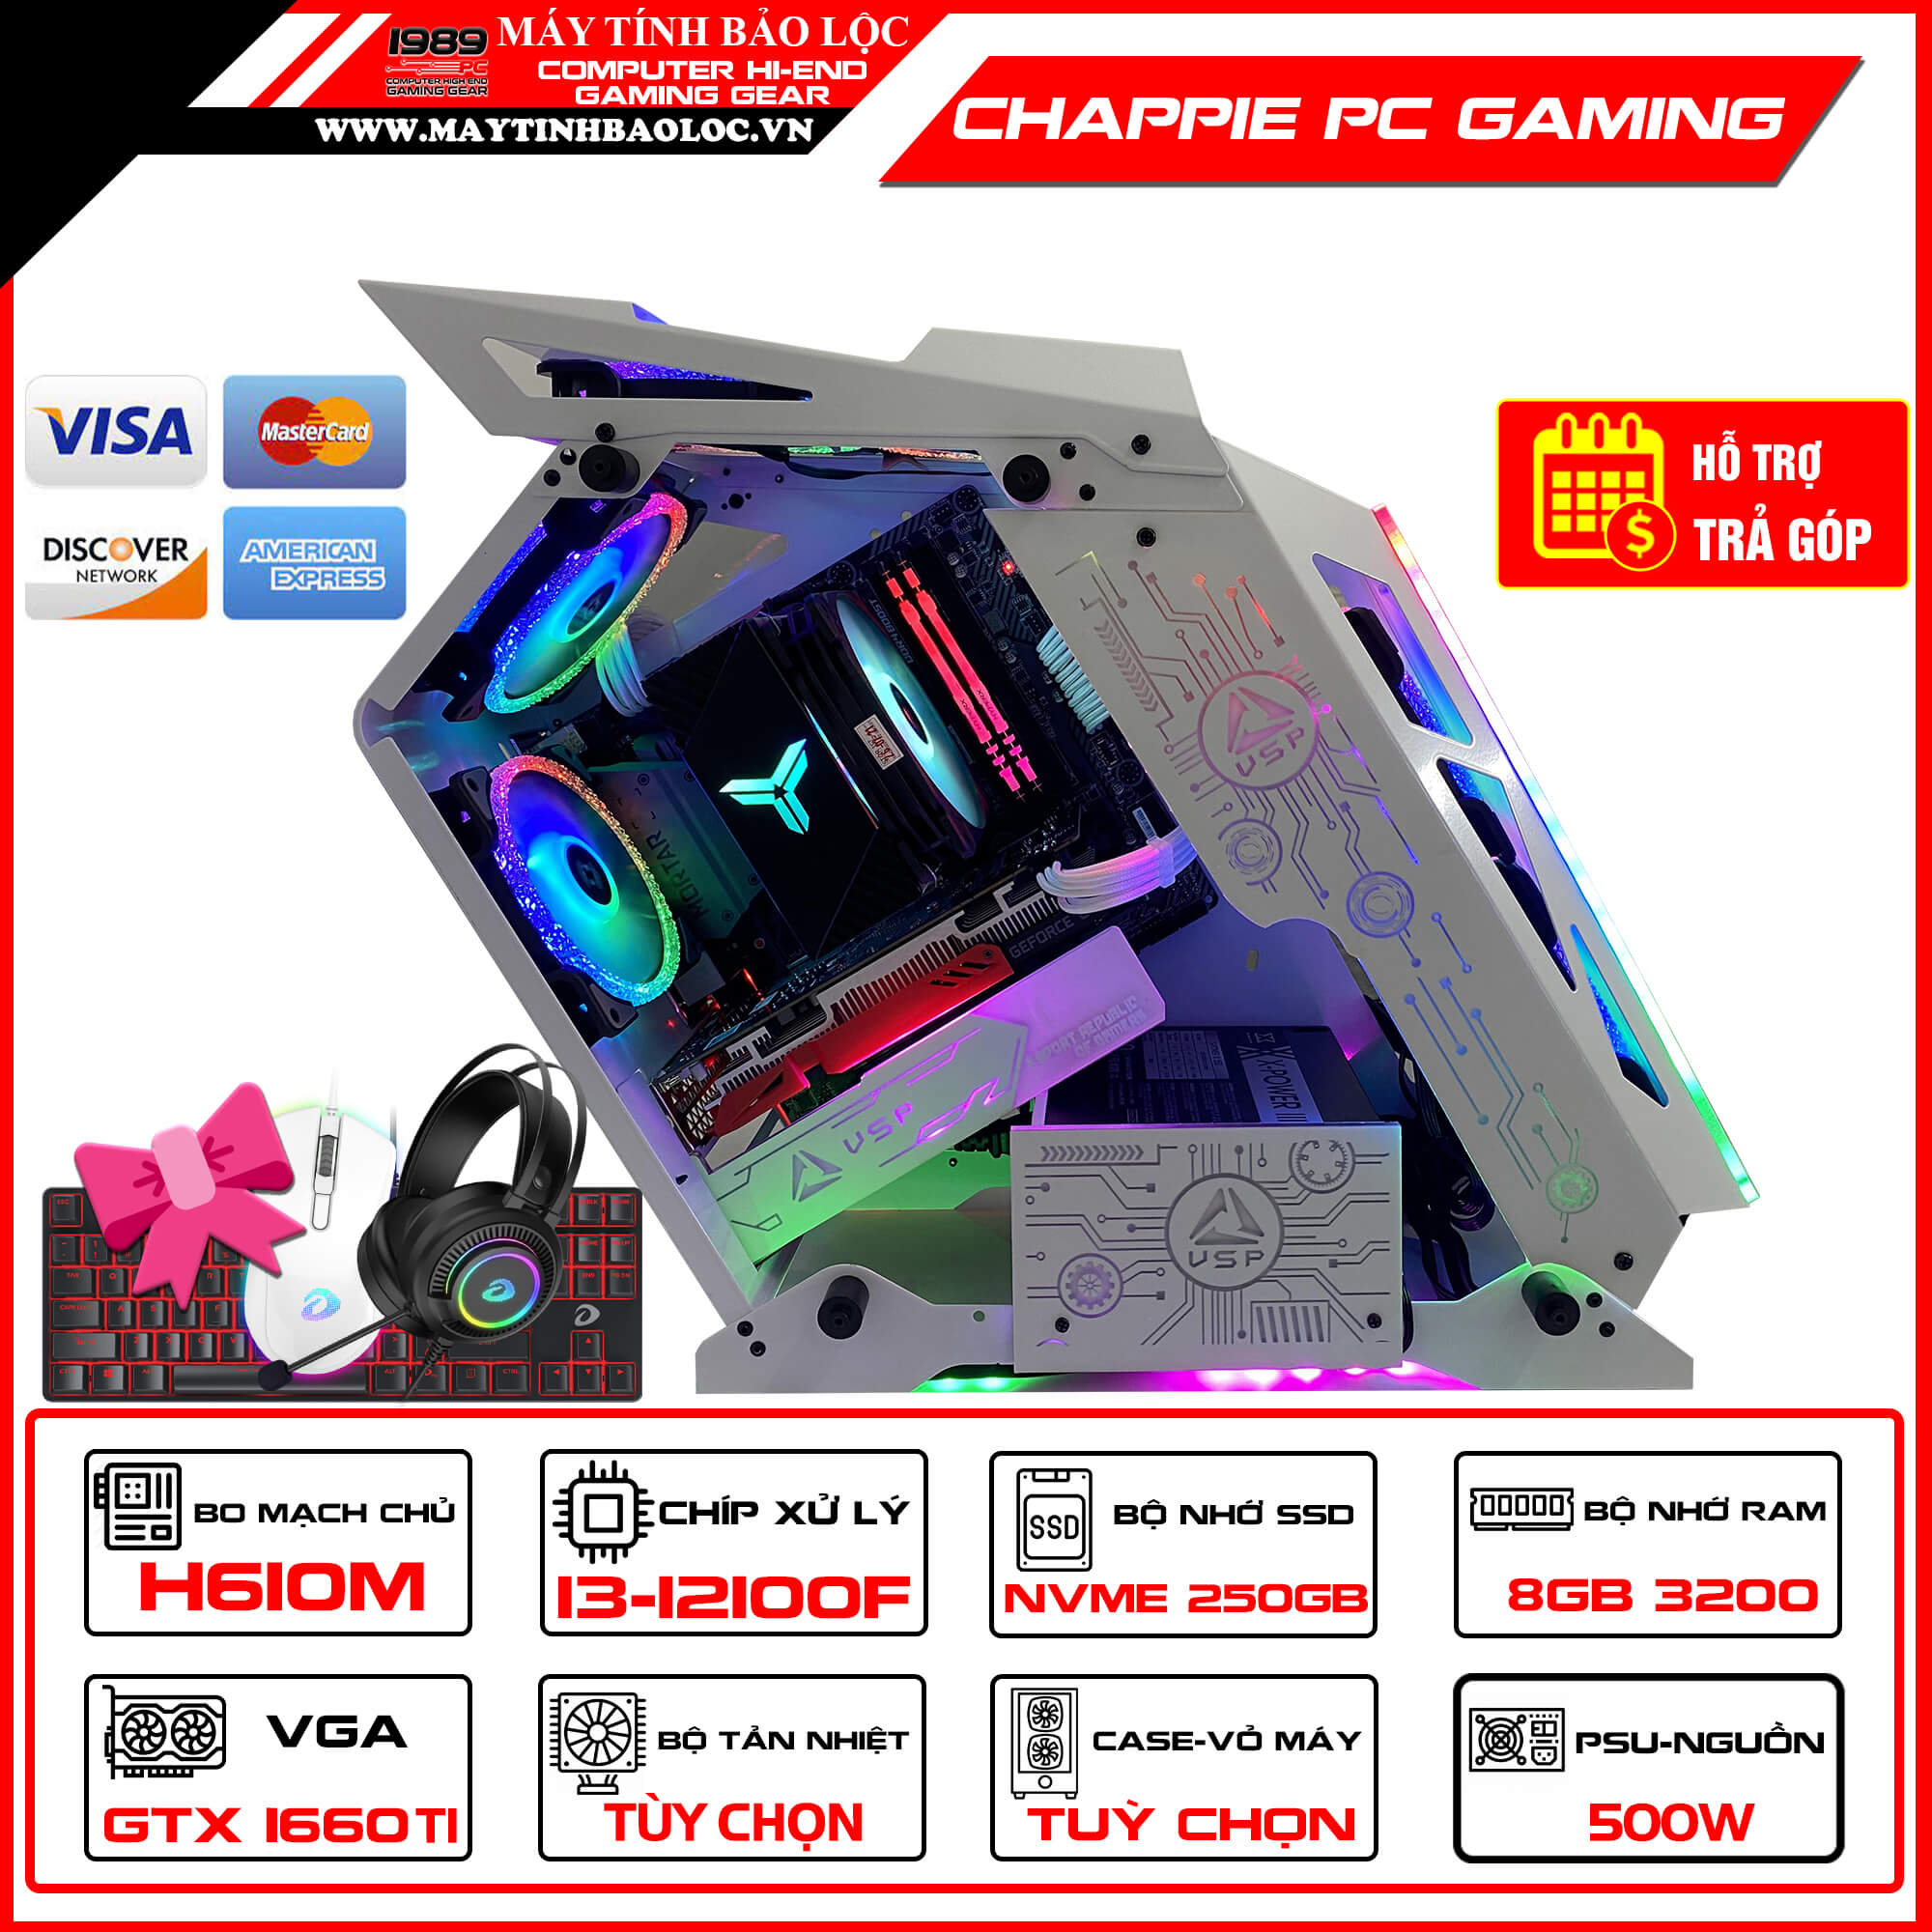 CHAPPIE PC GAMING